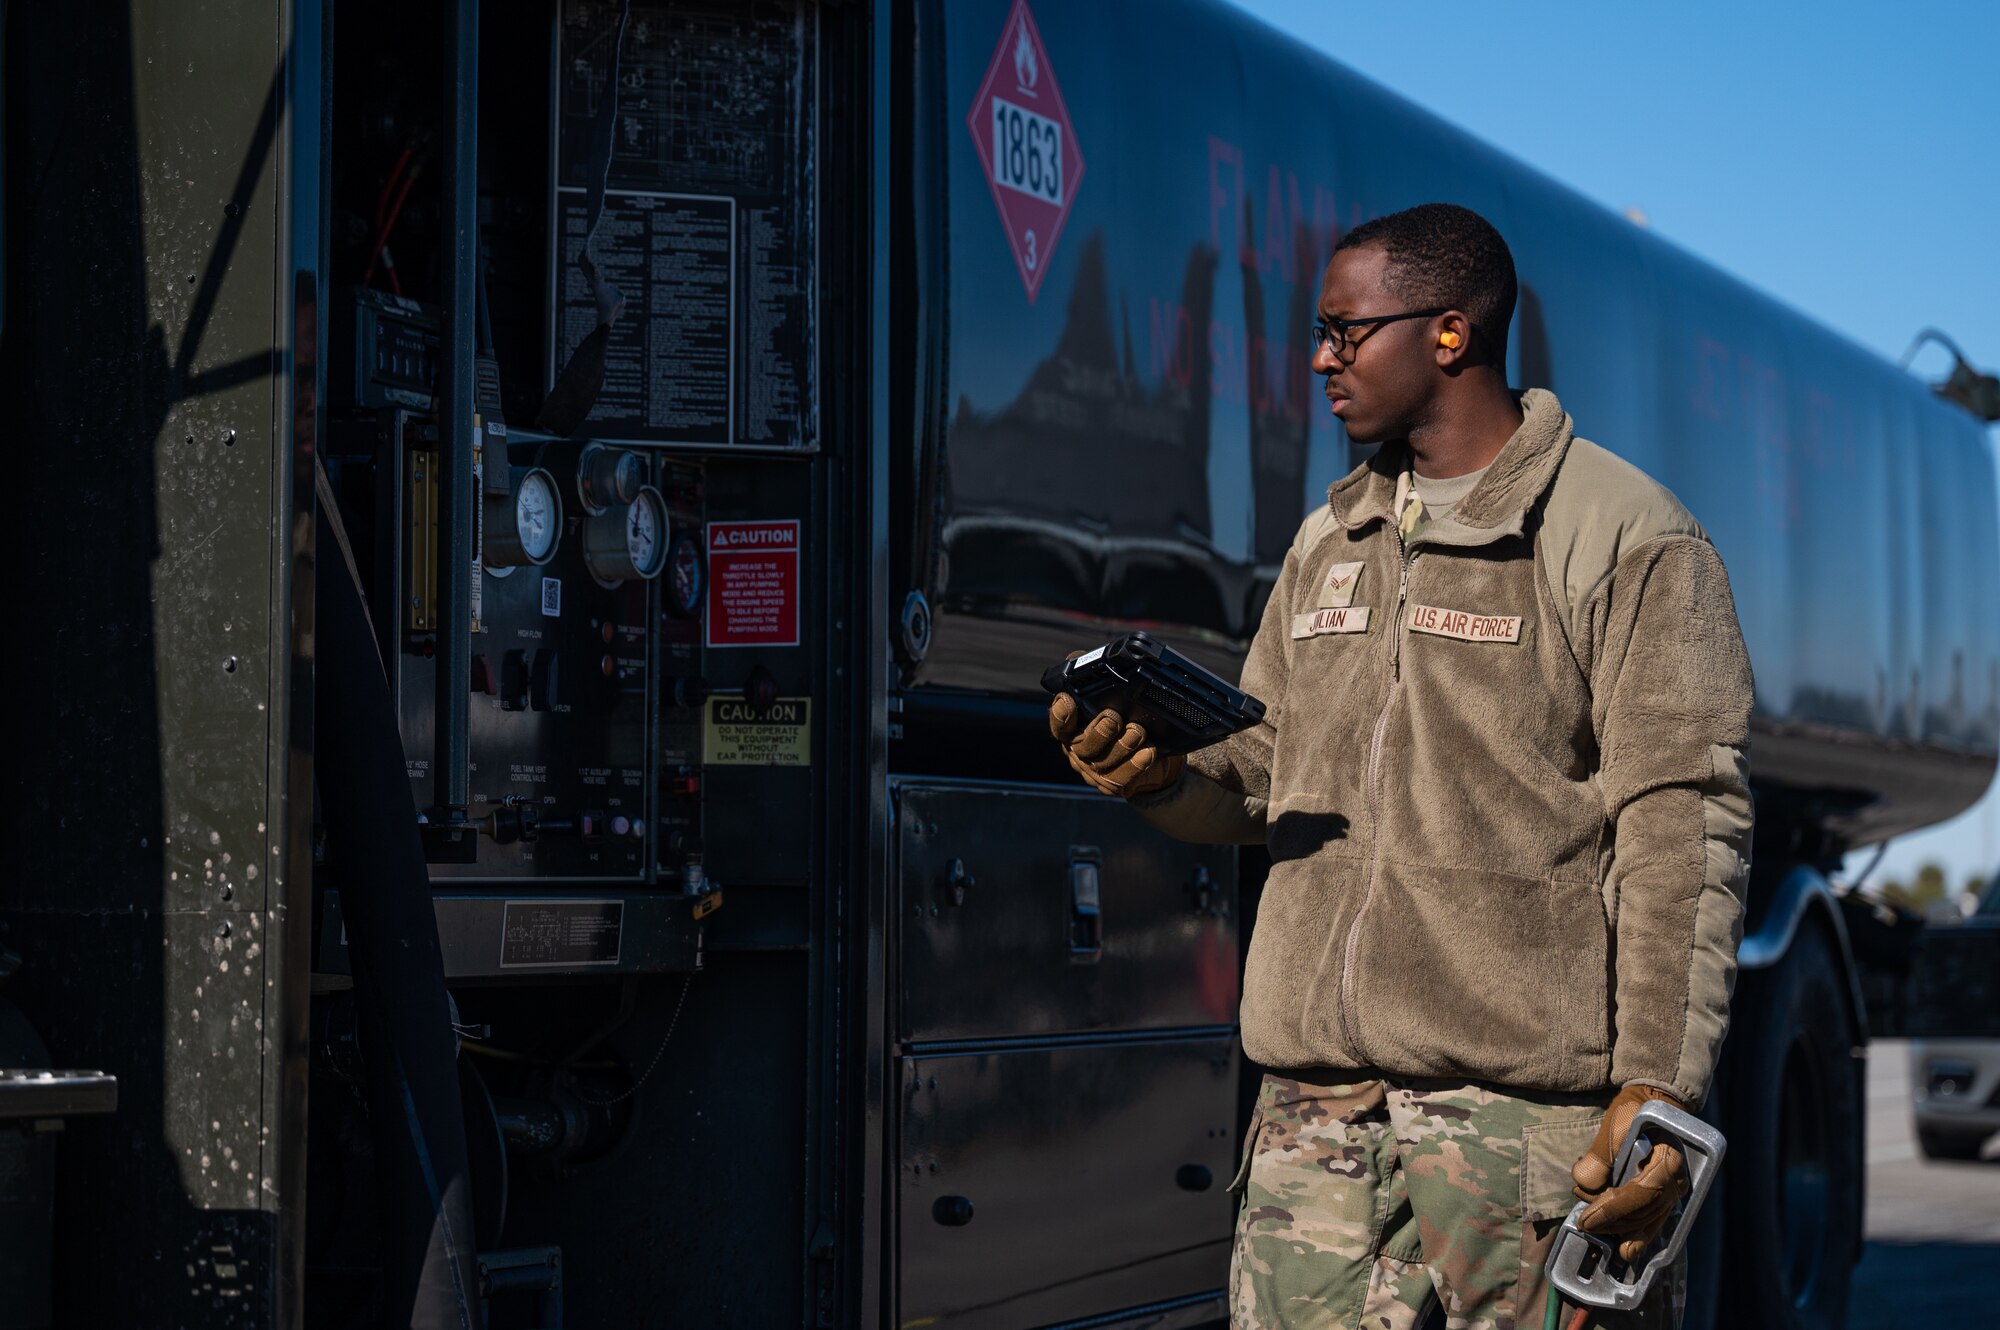 An Airman holds a tablet and stands next to a fuel truck